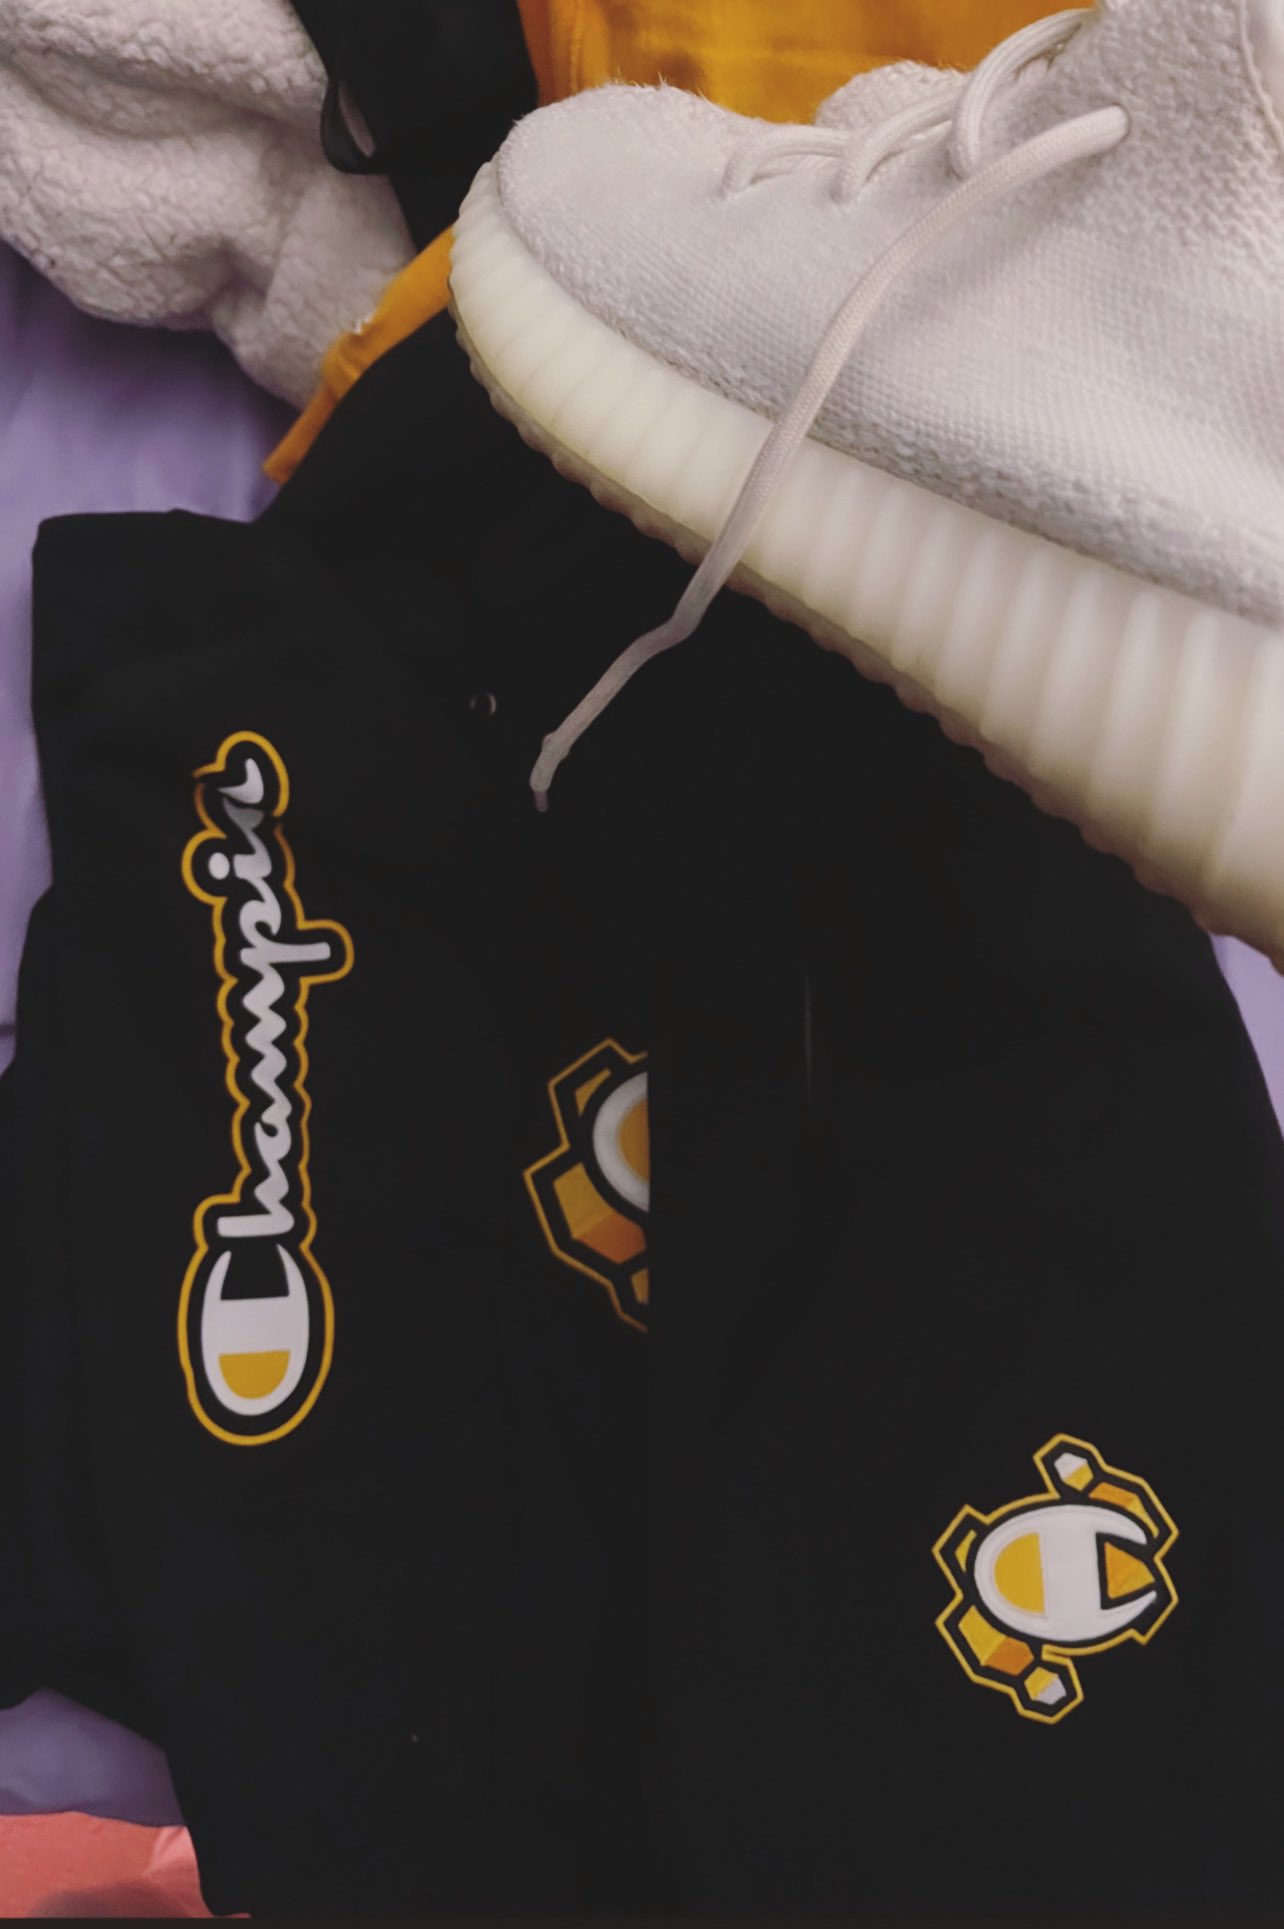 charter Stort univers Polar Plathanos 🐝 🇩🇴 on X: "Champion x HIVE joggers/Hoody/Cream Yeezys might  be the move for the airport later 😼🐝 https://t.co/e7LyQdpZzf" / X